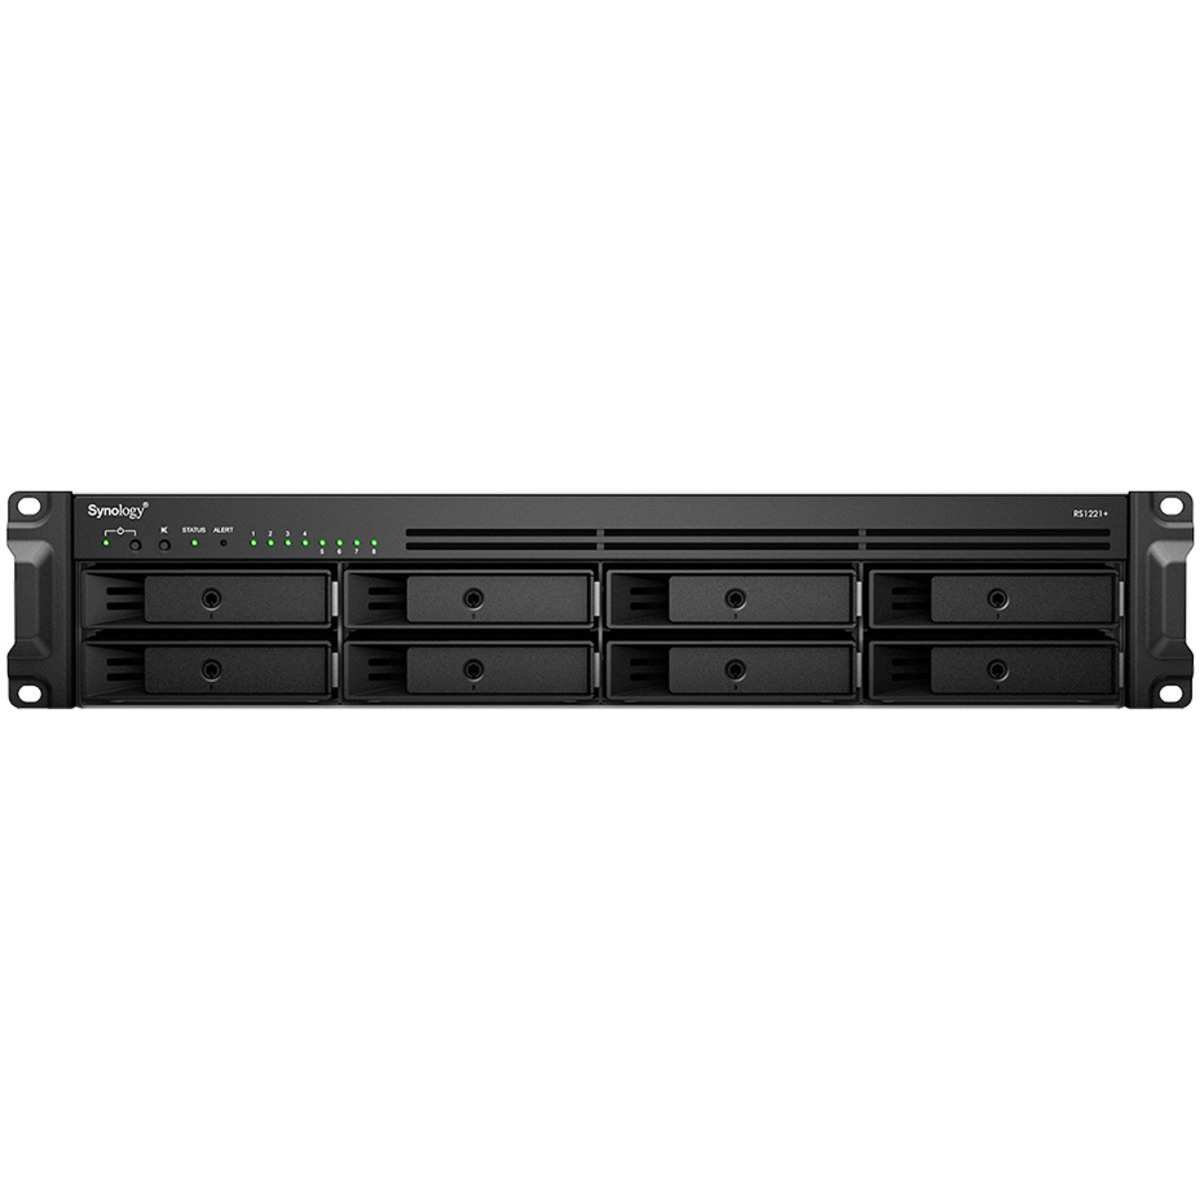 Synology RackStation RS1221+ 8tb 8-Bay RackMount Multimedia / Power User / Business NAS - Network Attached Storage Device 4x2tb Samsung 870 EVO MZ-77E2T0BAM 2.5 560/530MB/s SATA 6Gb/s SSD CONSUMER Class Drives Installed - Burn-In Tested RackStation RS1221+